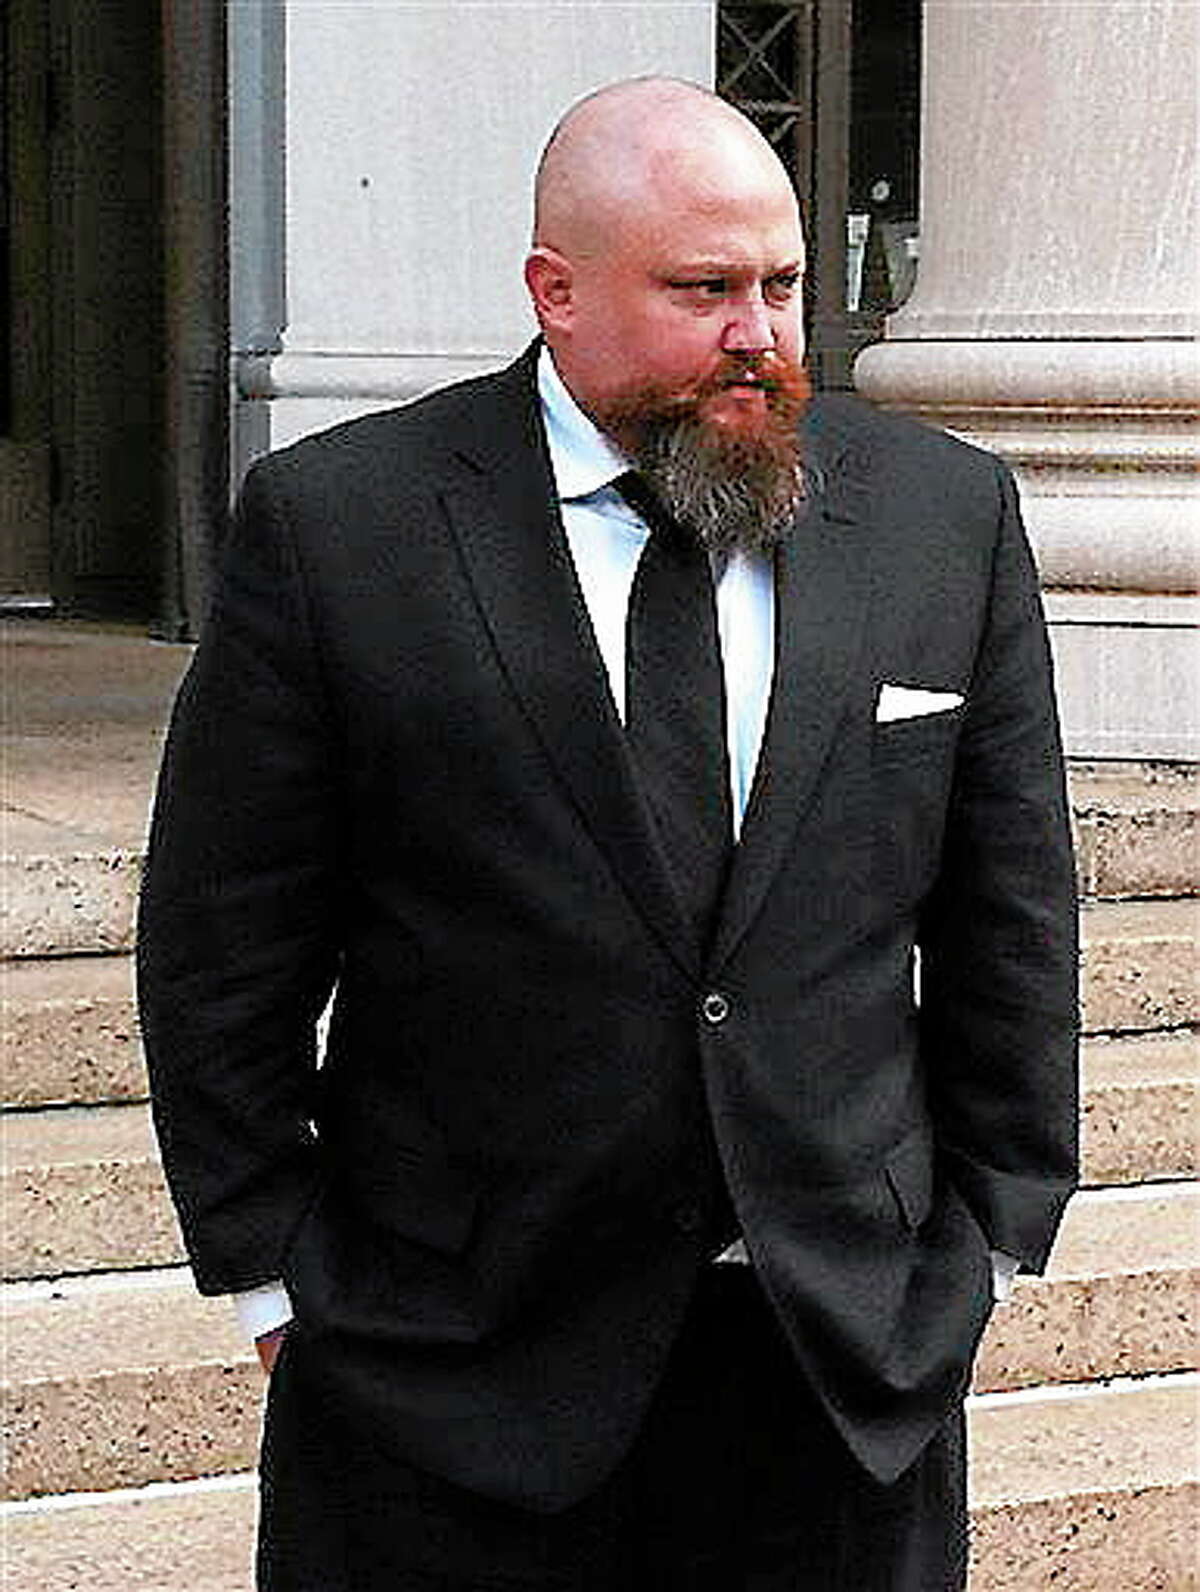 Robert Braddock Jr. walks outside federal court in New Haven, Conn., Monday May 13, 2013. Braddock, the finance director for ex-Connecticut House Speaker's failed congressional campaign last year, is on trial on conspiracy and campaign finance charges. (AP Photo/David Collins)